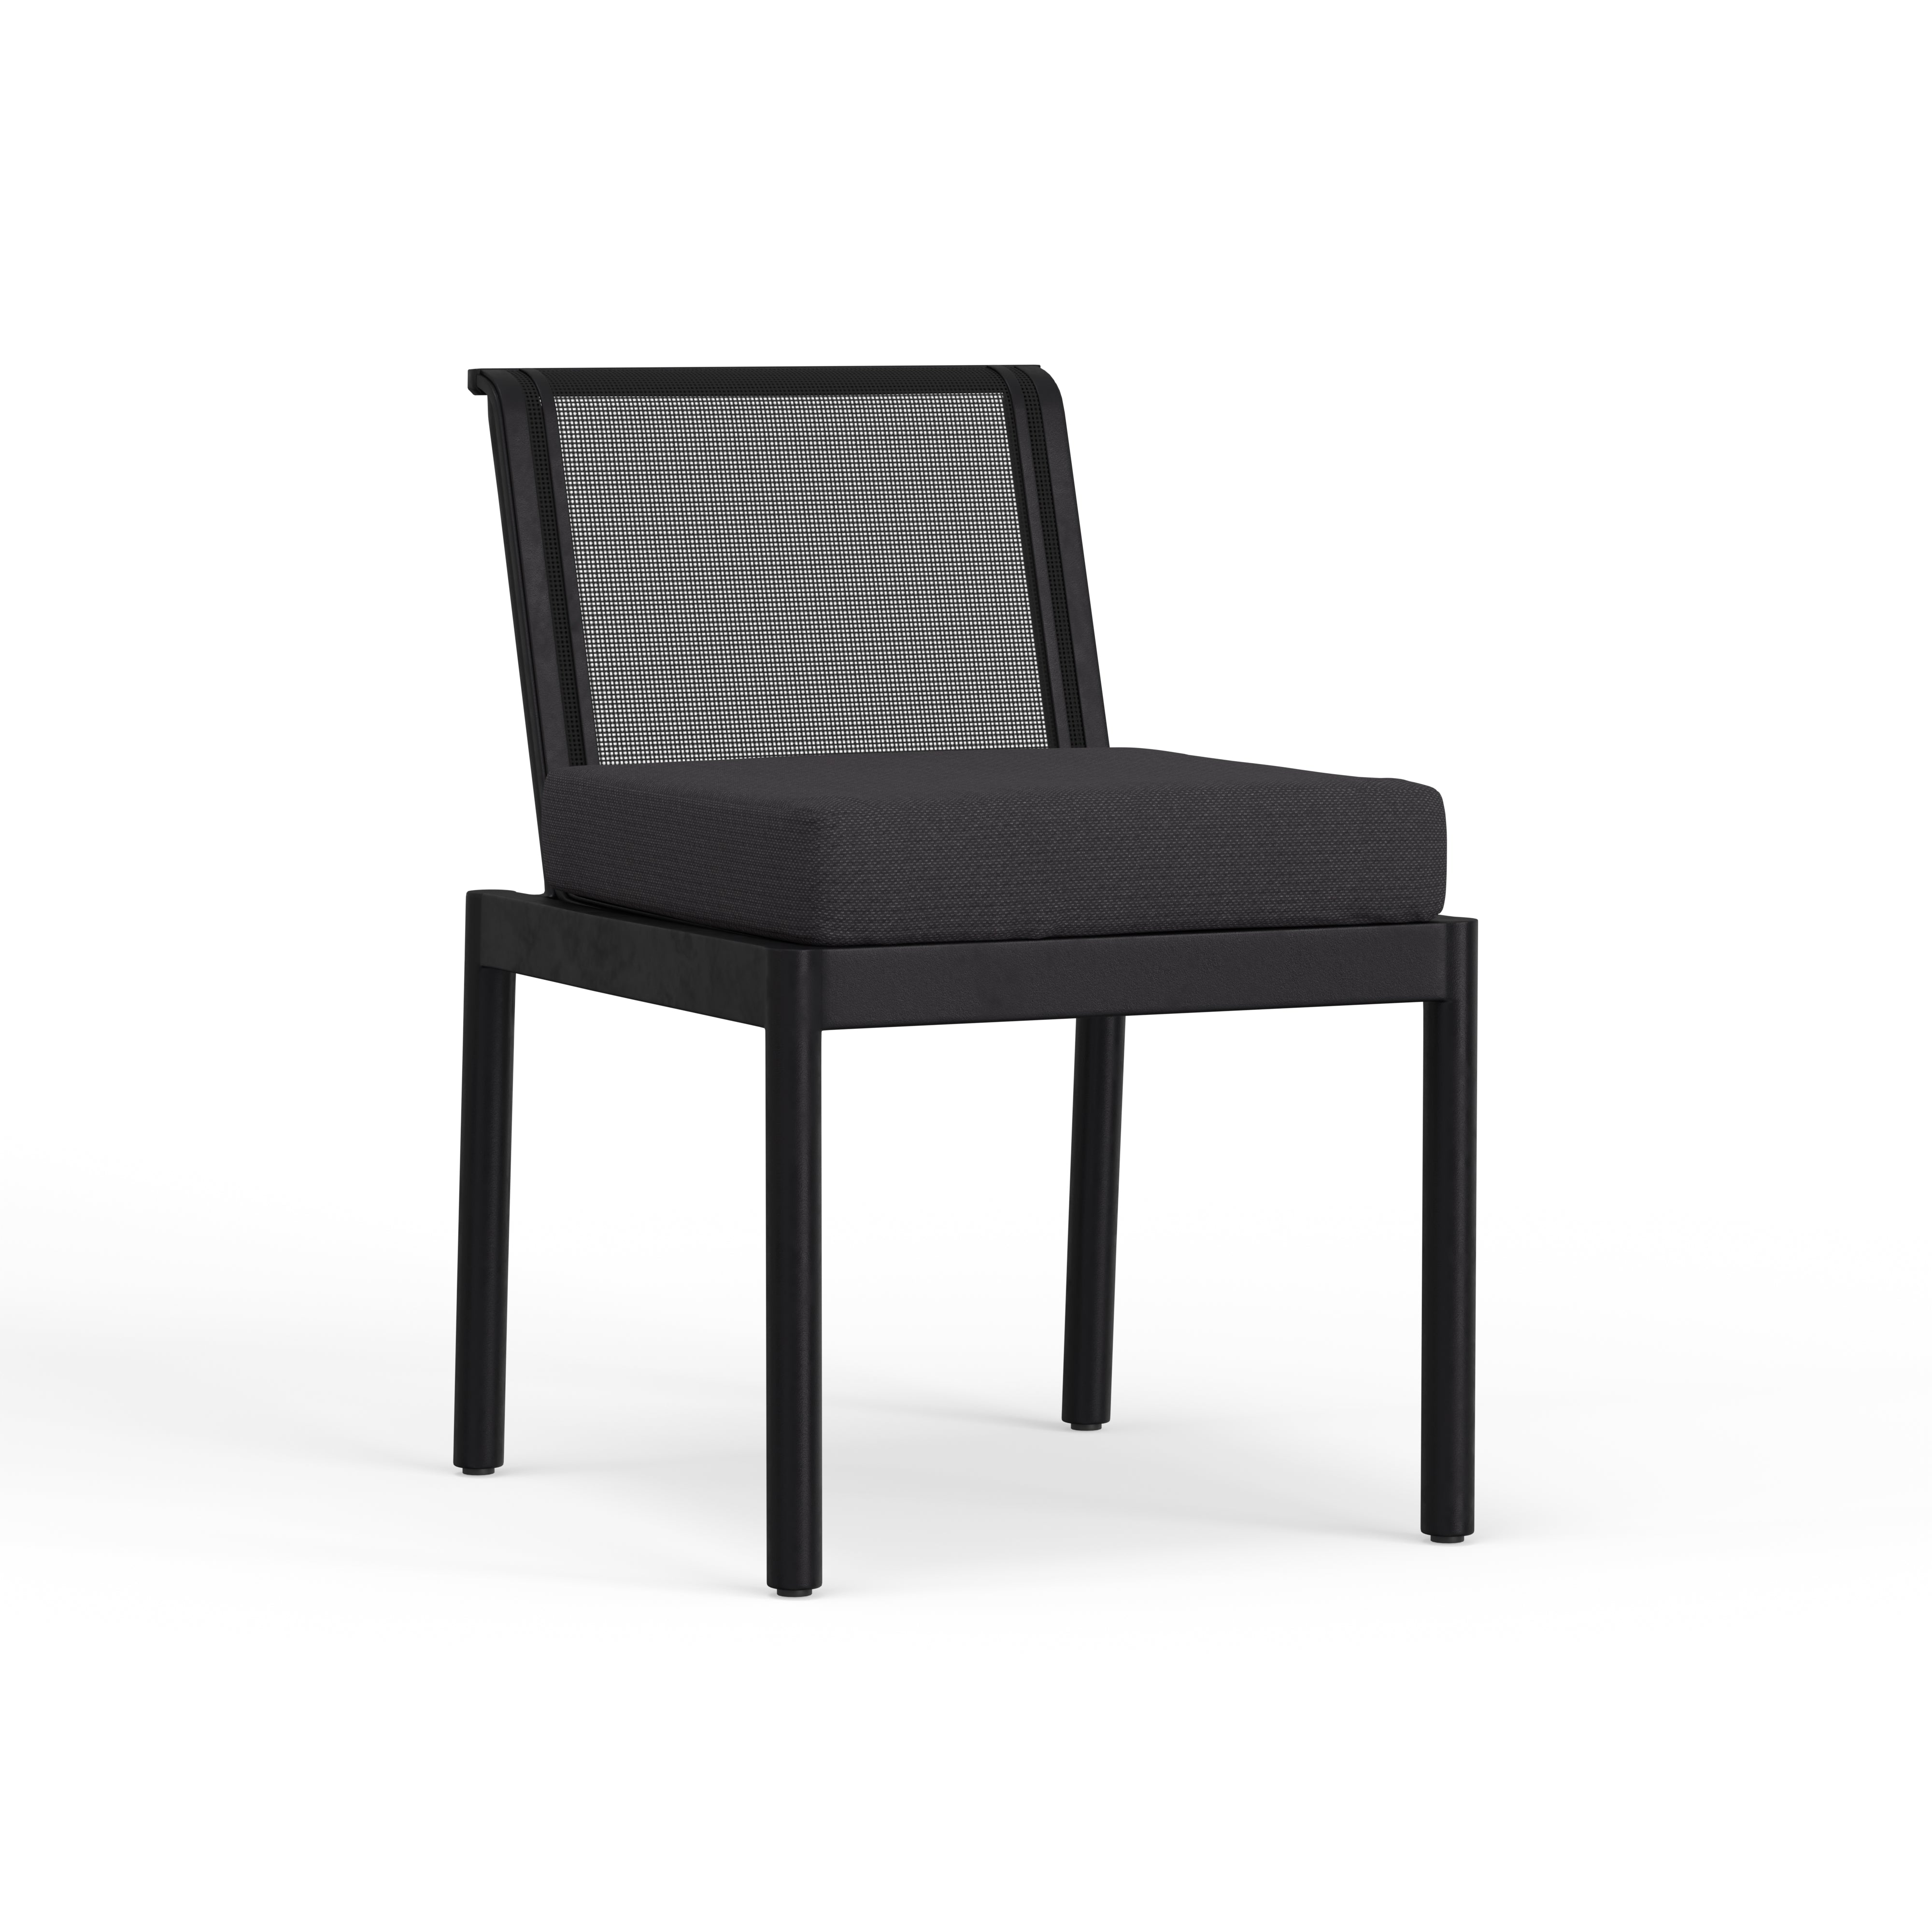 Luxury Outdoor Dining Chair In Black